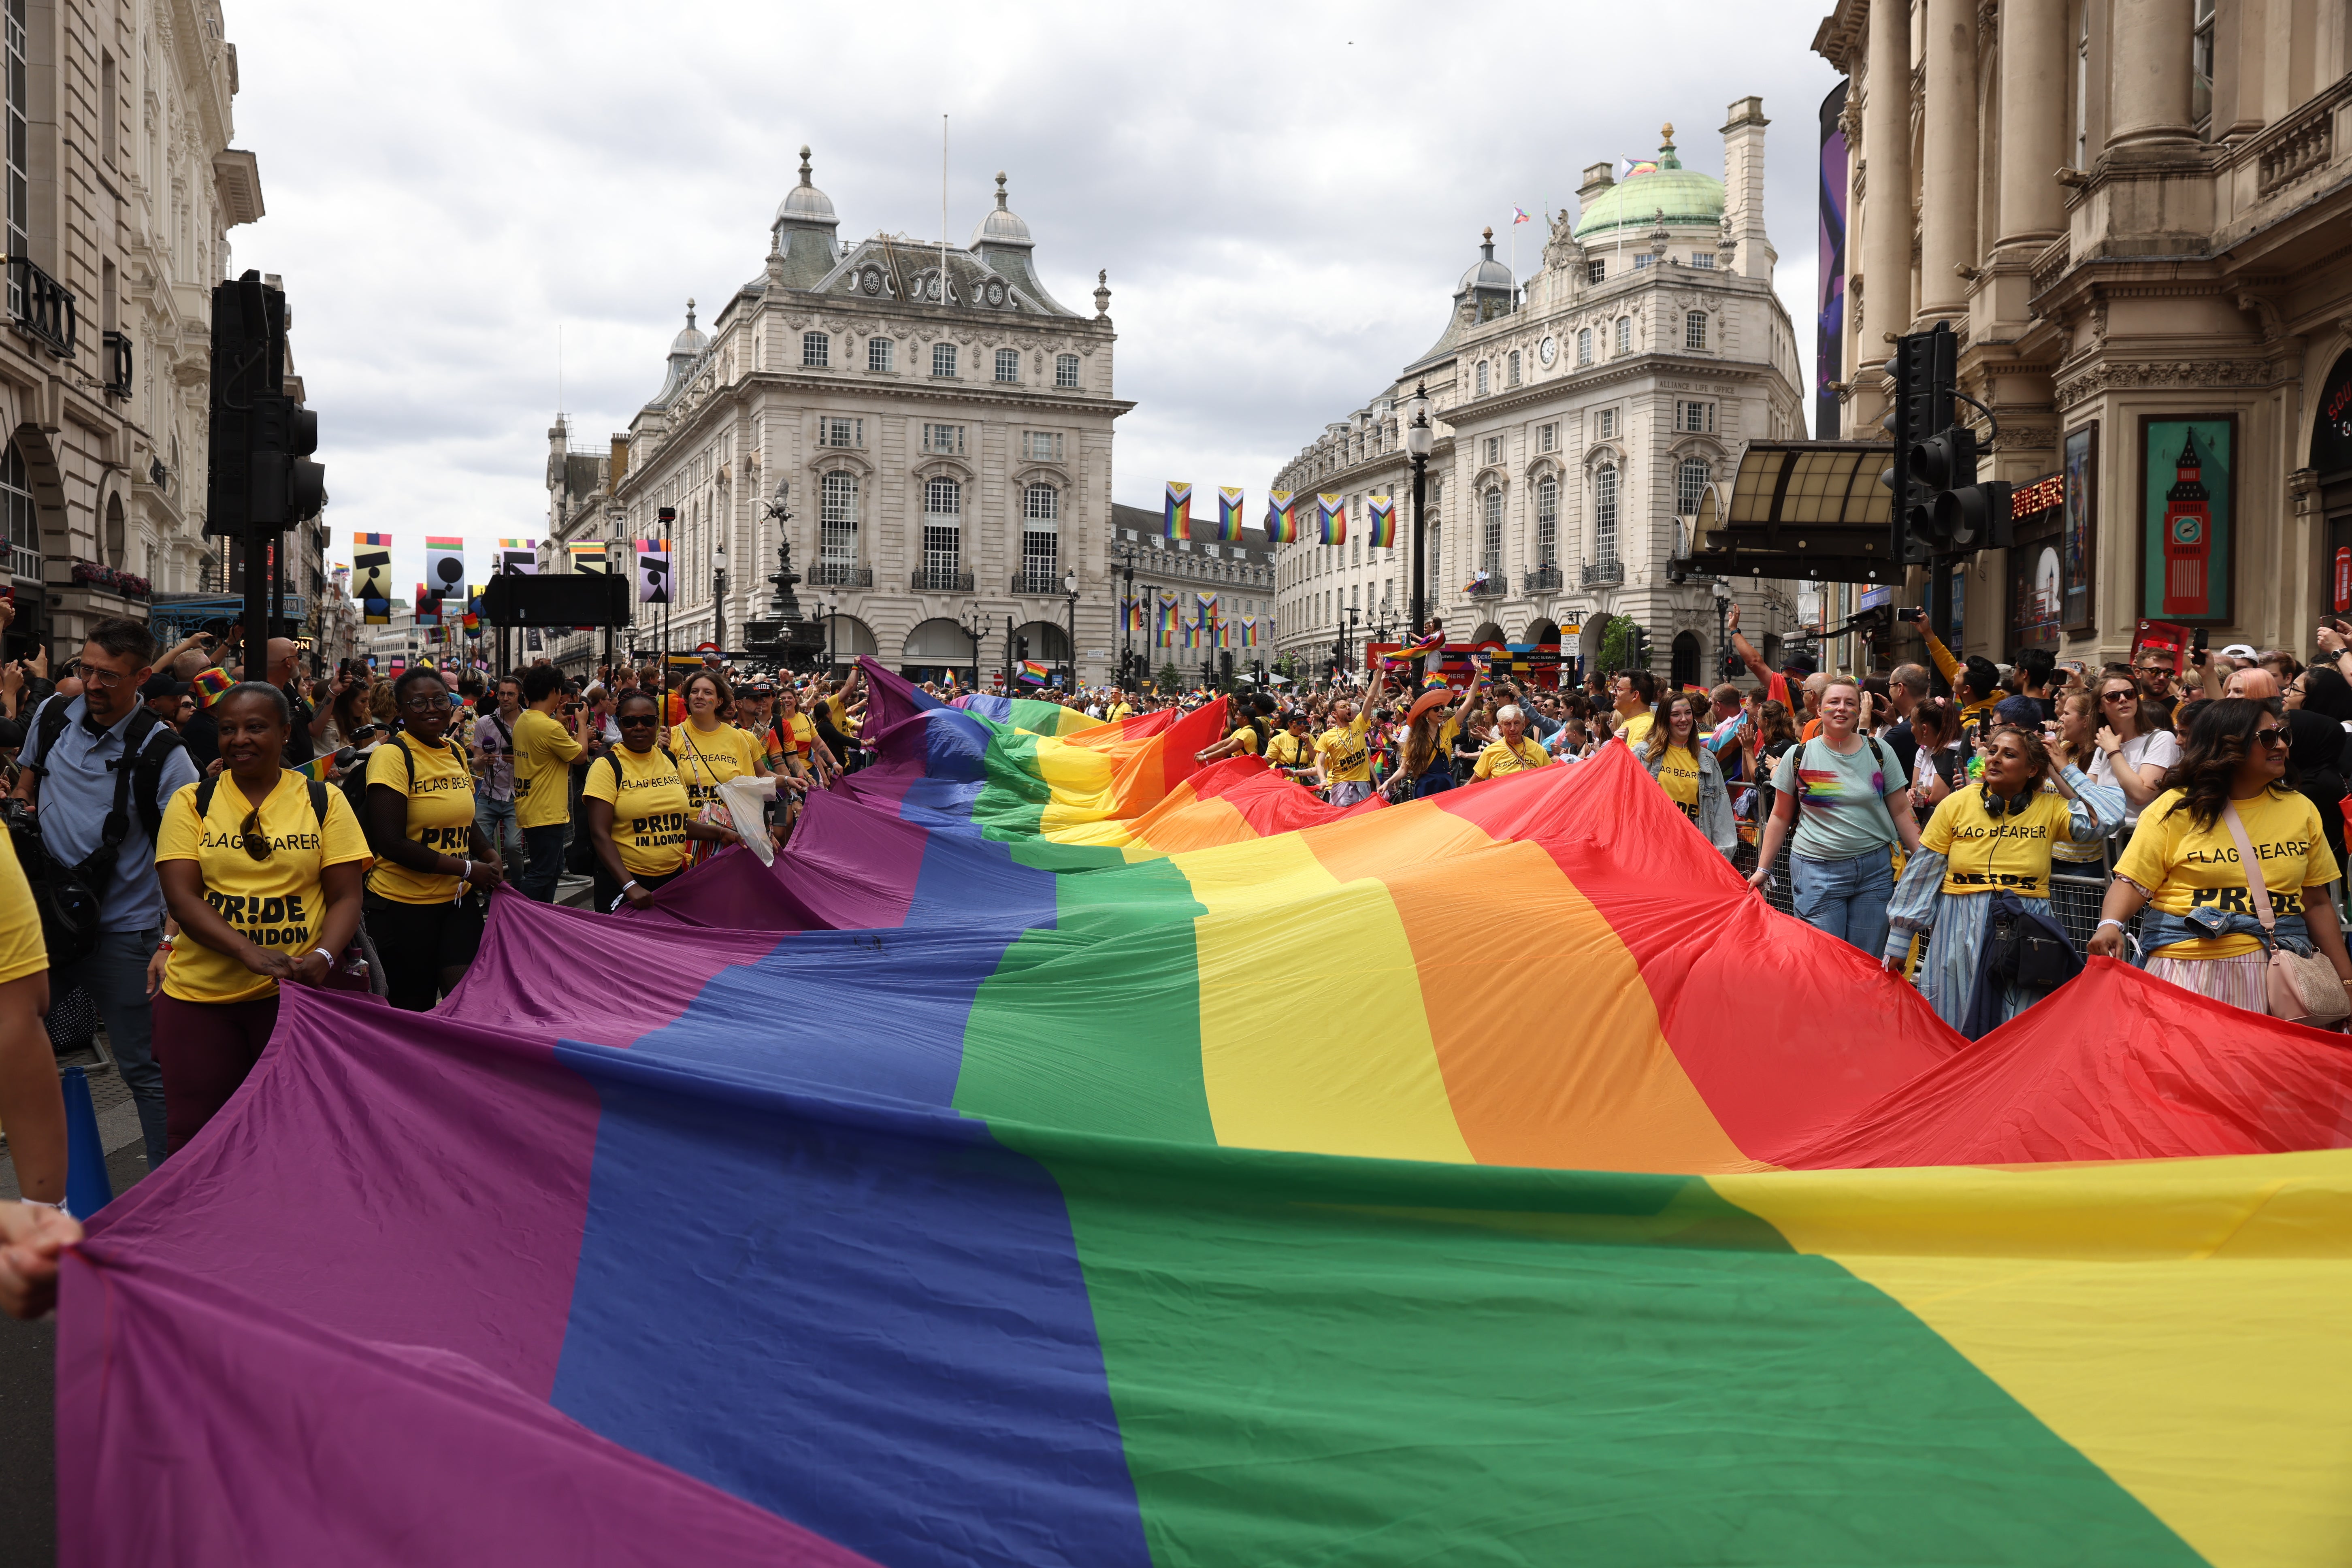 Members of the LGBT+ community at last year’s Pride parade in London